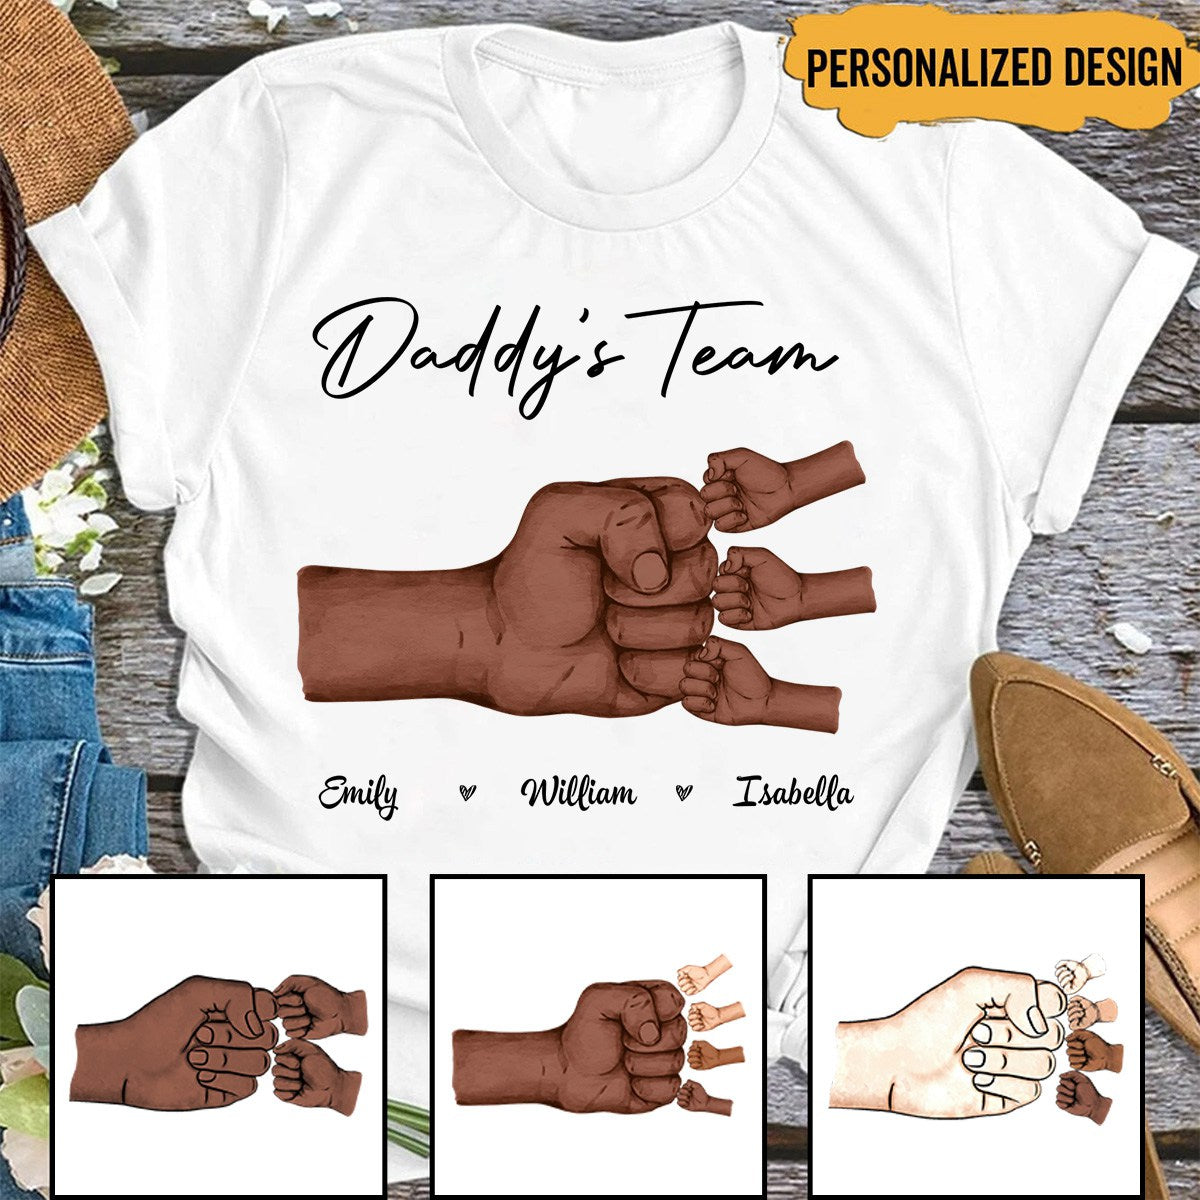 Mother Or Daddy & Kids, Together We're A Team - Personalized T-Shirt - Father's Day Gift, Mother's Day